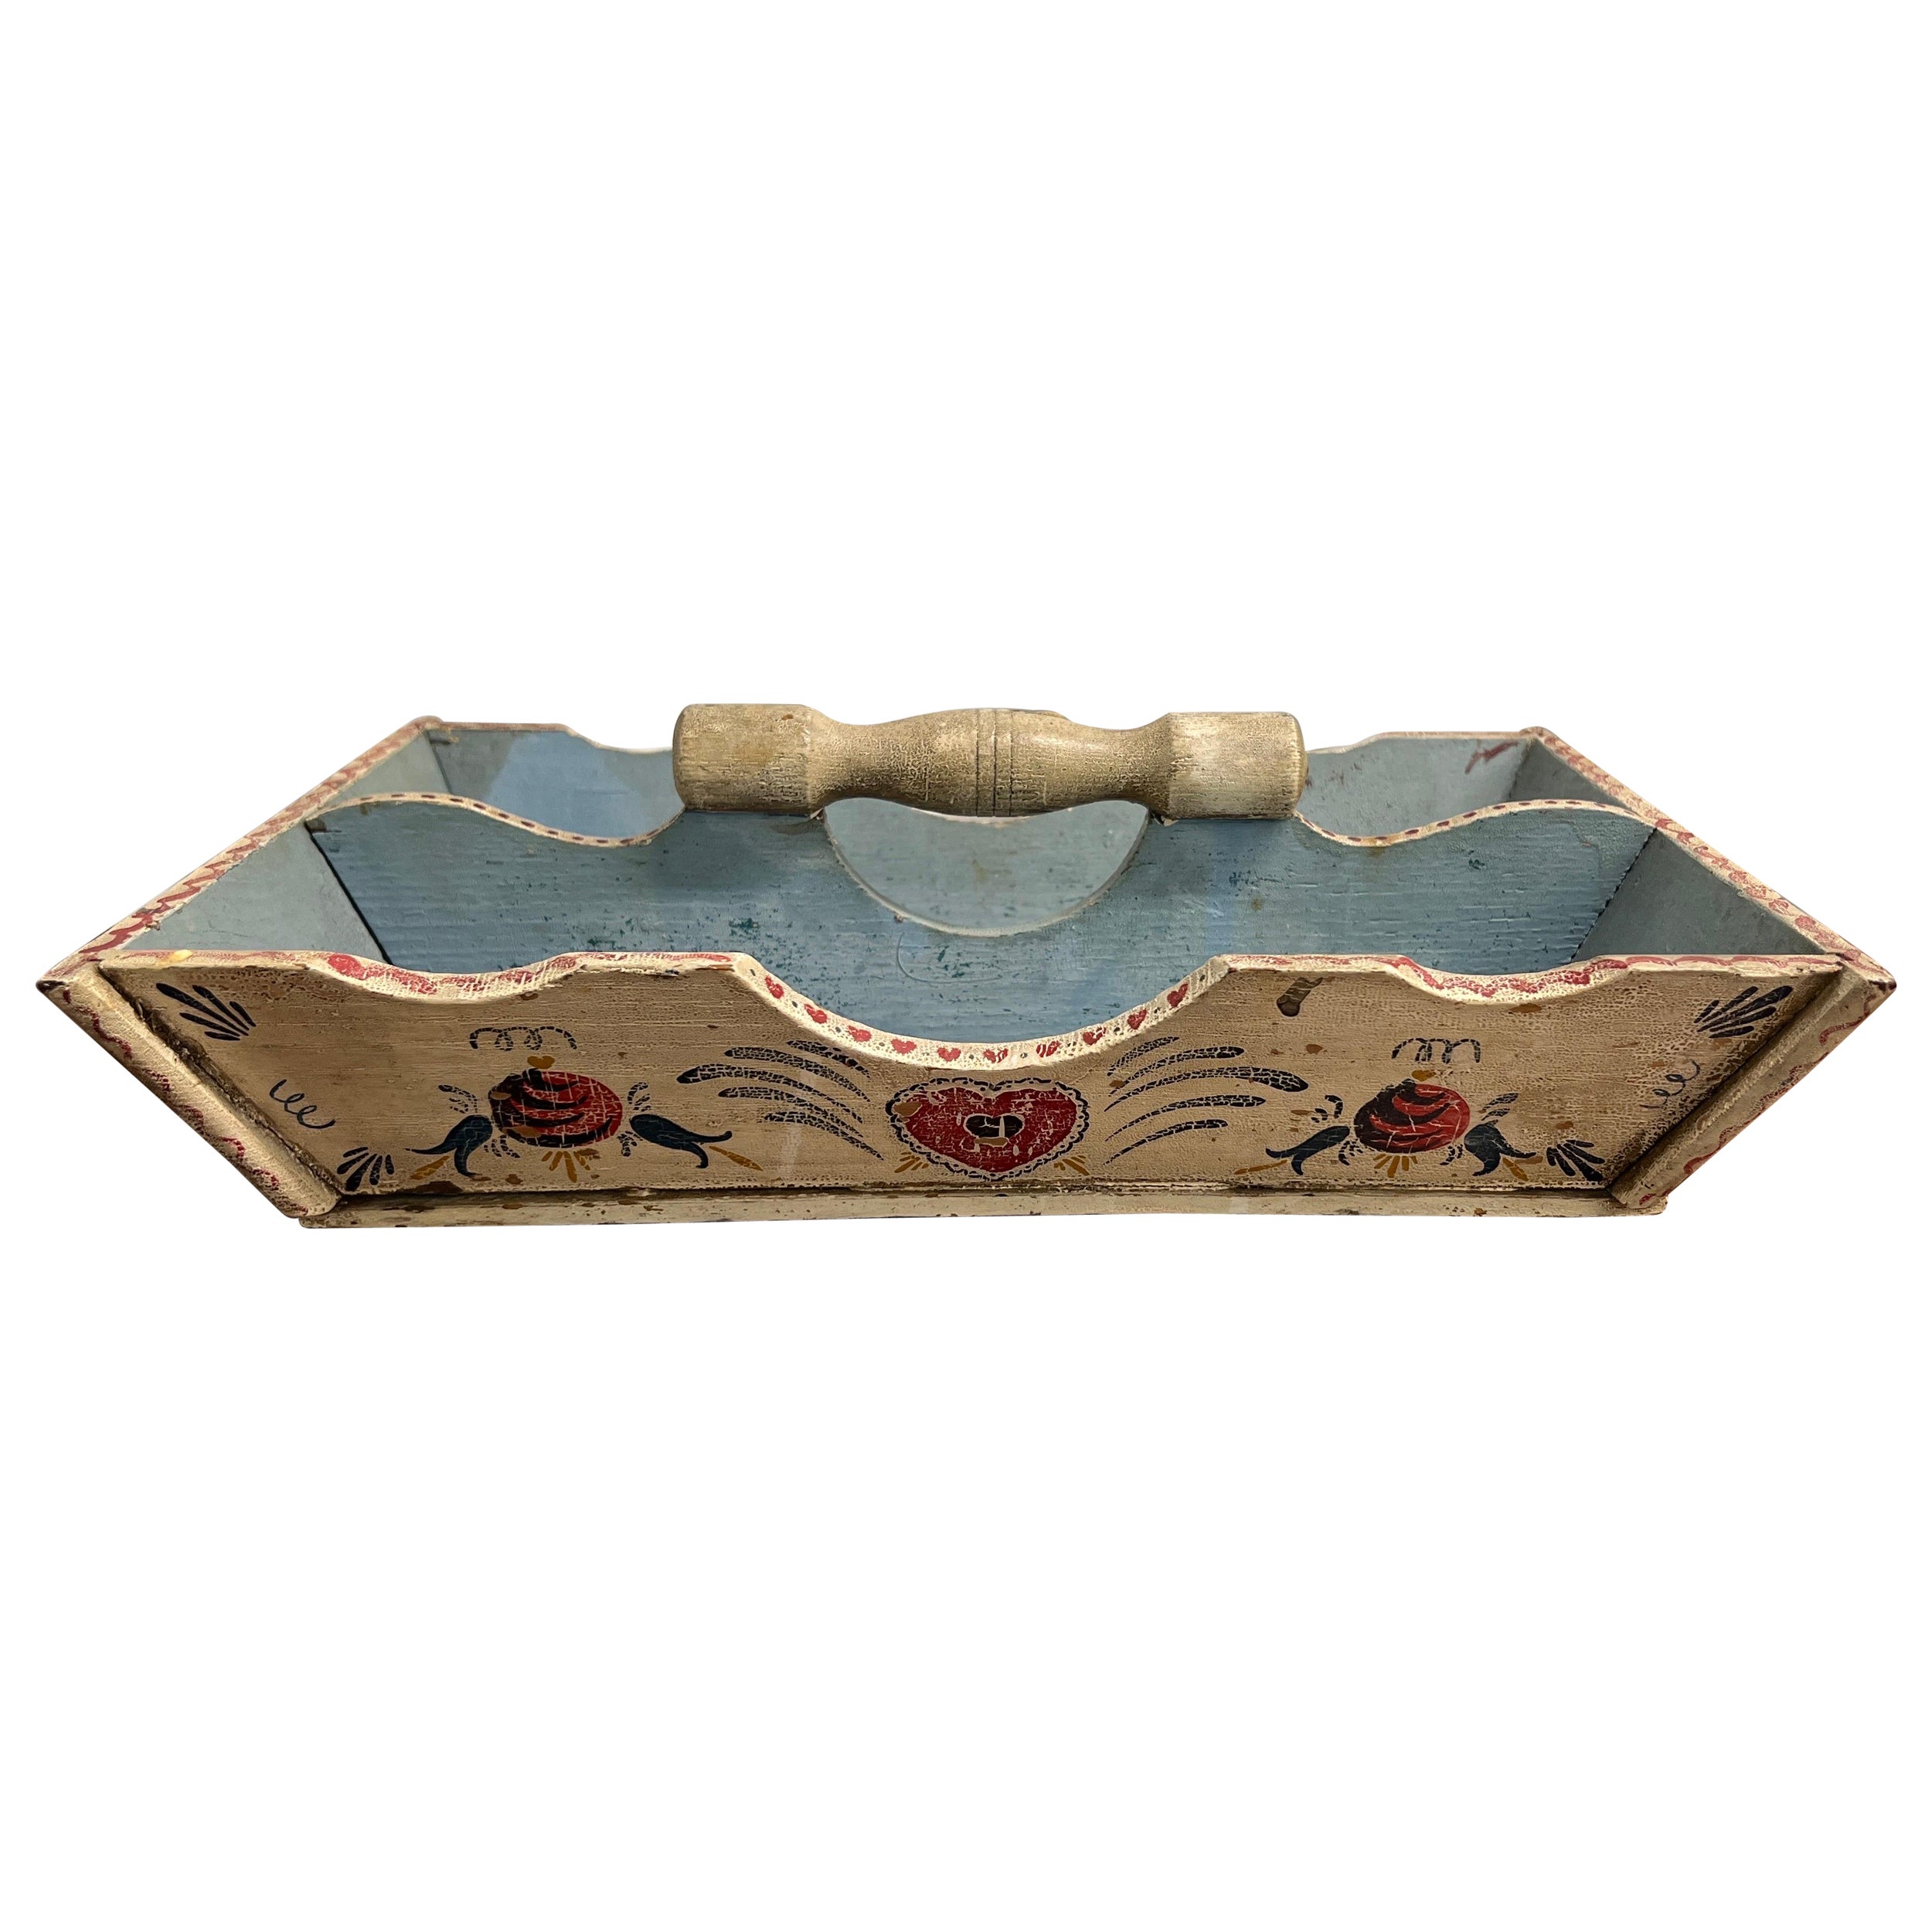  Fantastic American Paint Decorated Folk Art Cutlery Tray - Circa 1845 For Sale